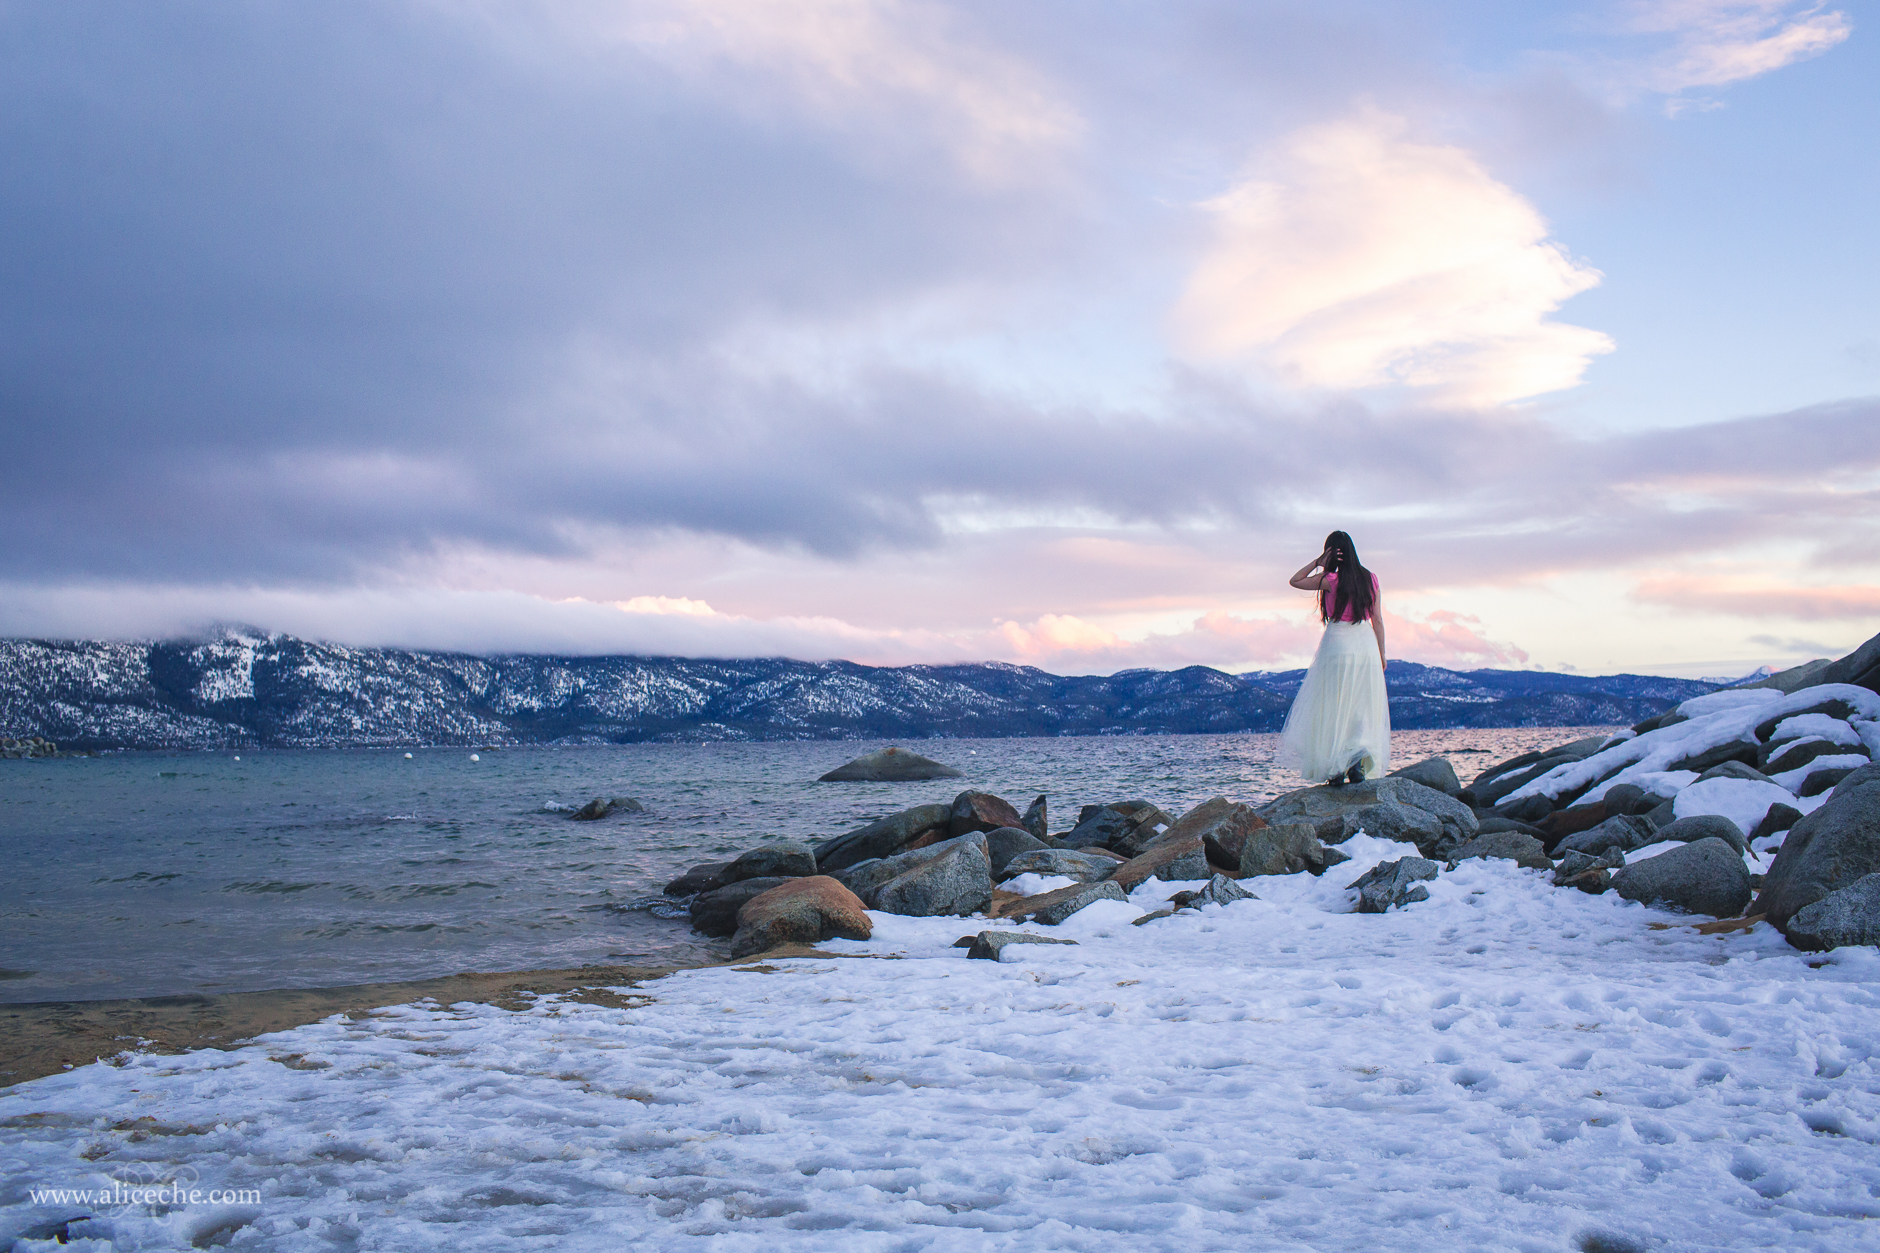 alice-che-photography-lake-tahoe-self-portrait-sunset-girl-in-tulle-skirt-on-edge-of-lake-and-snow